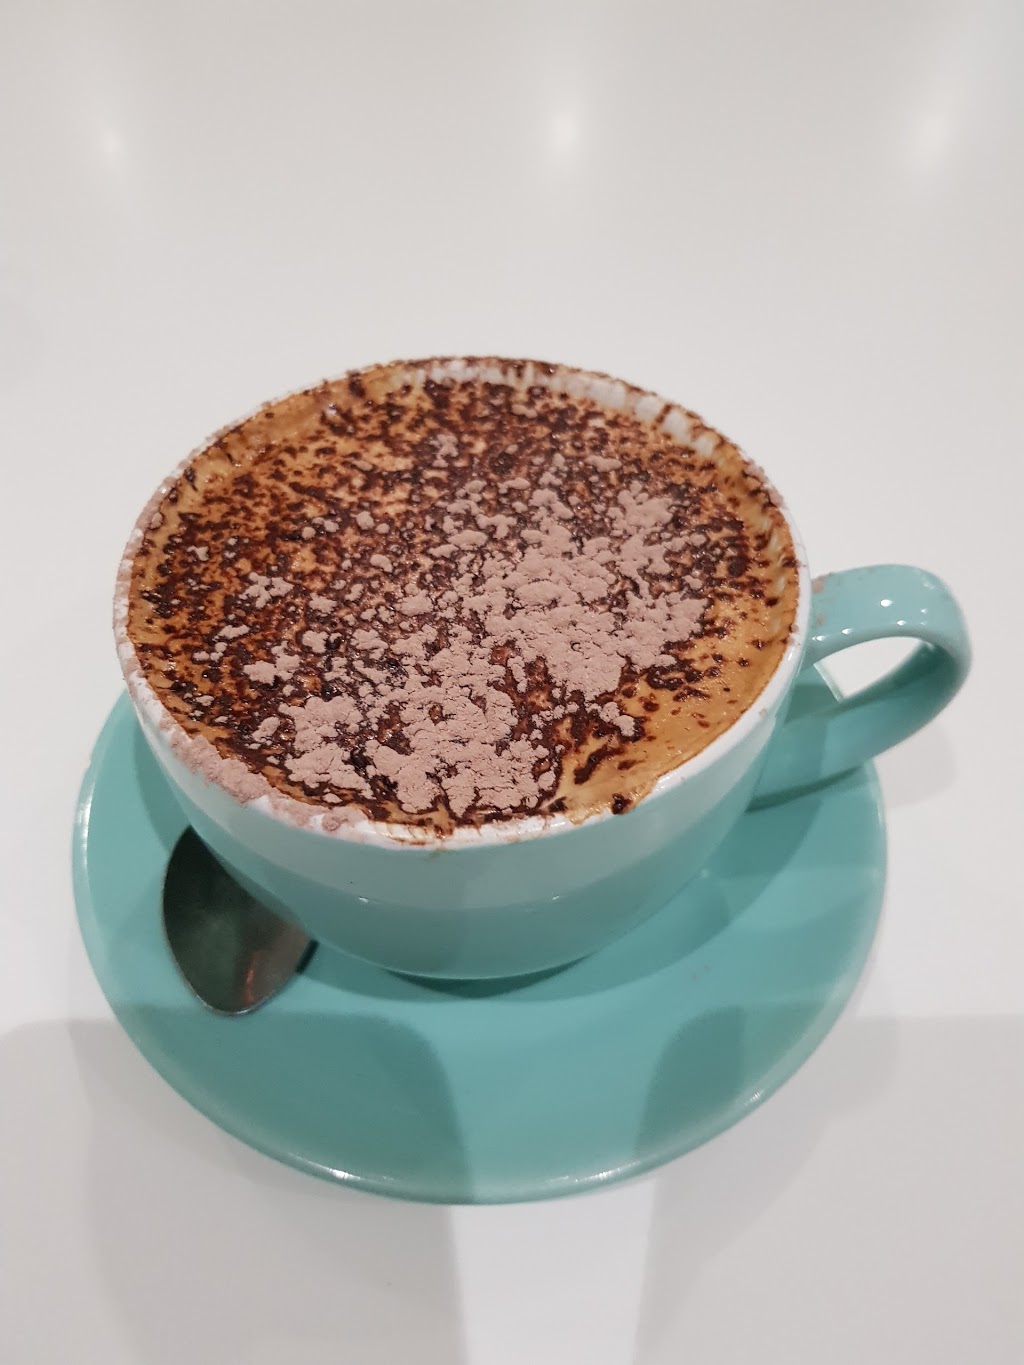 Ripples Licensed Cafe | cafe | 2 Tweed Coast Rd, Hastings Point NSW 2489, Australia | 0266761234 OR +61 2 6676 1234